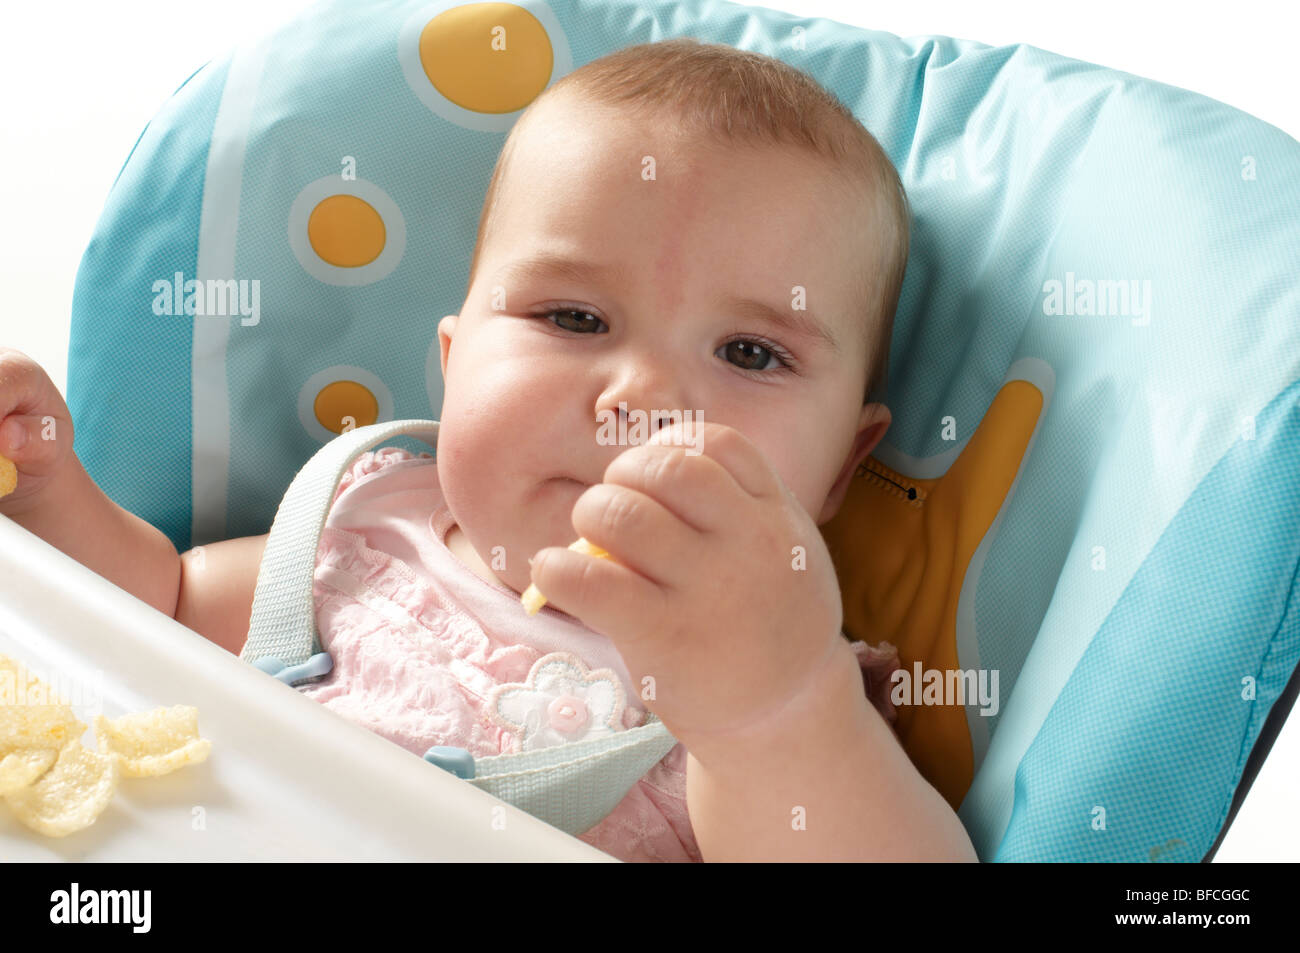 Baby Girl in pink top feeding and being fed in blue and yellow high chair Stock Photo